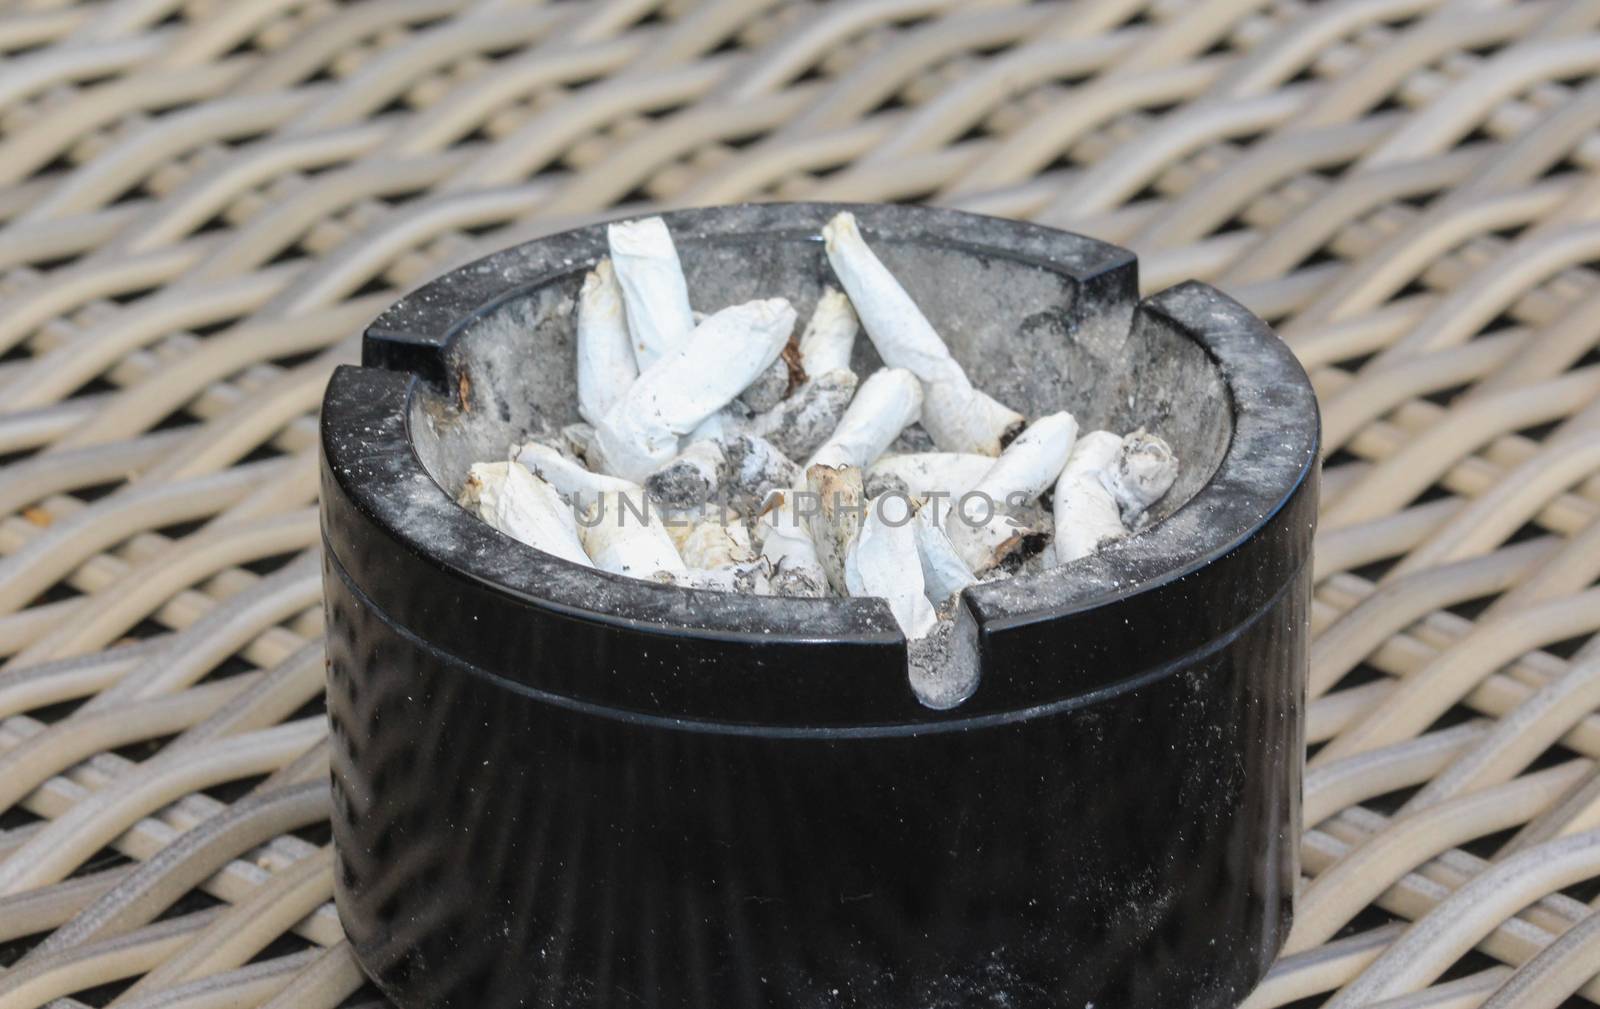 ashtray filled with tobacco ash and cigarette butts by michaelmeijer